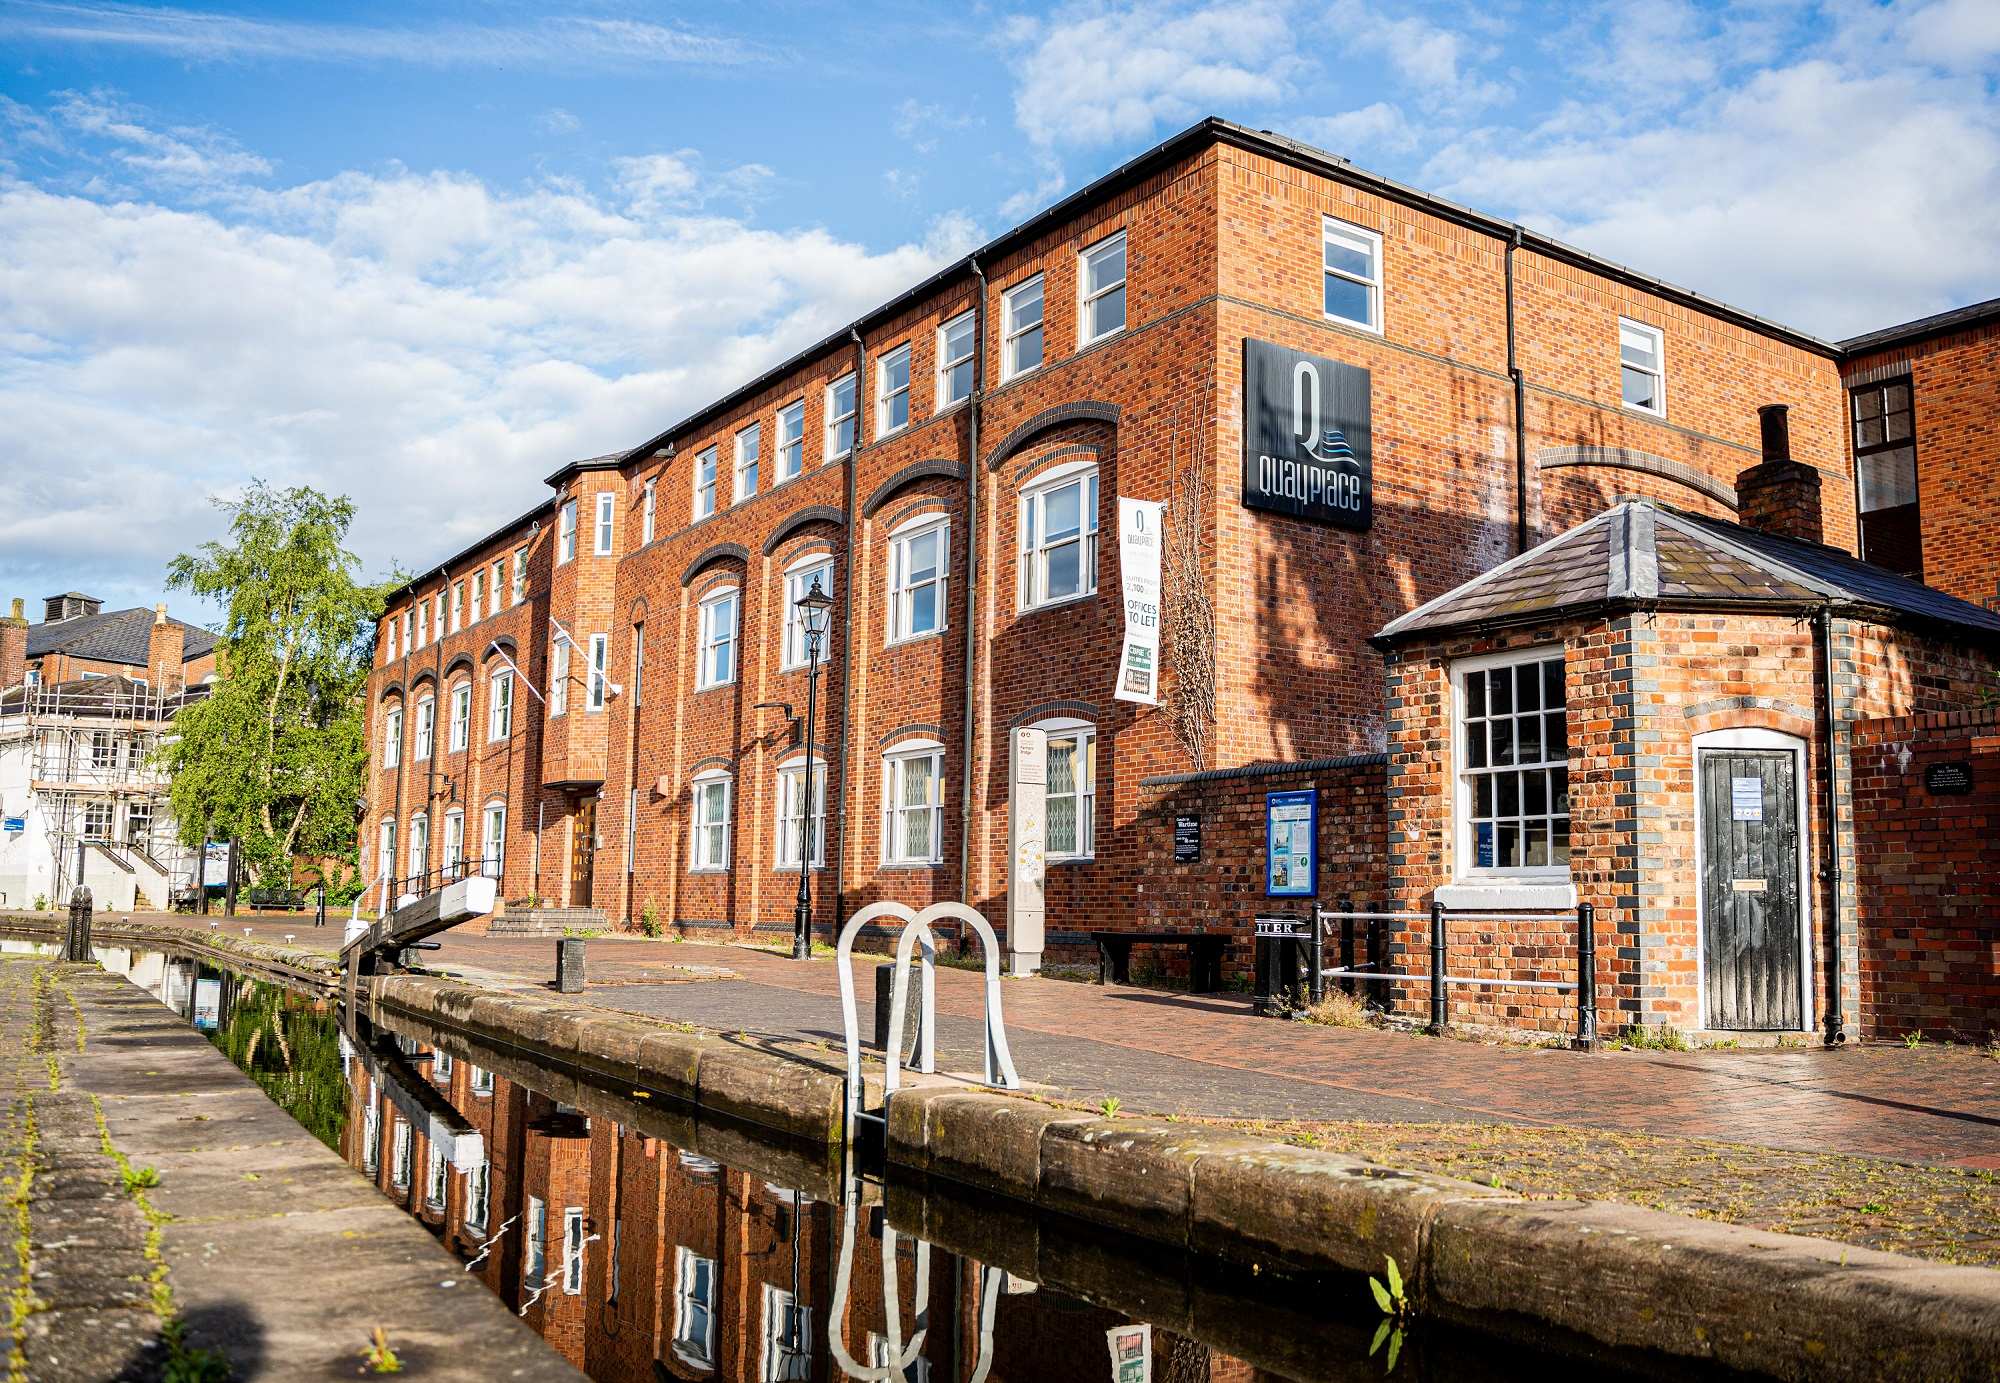 A big square building made from red brick in the style of the industrial revolution overlooking a canal.